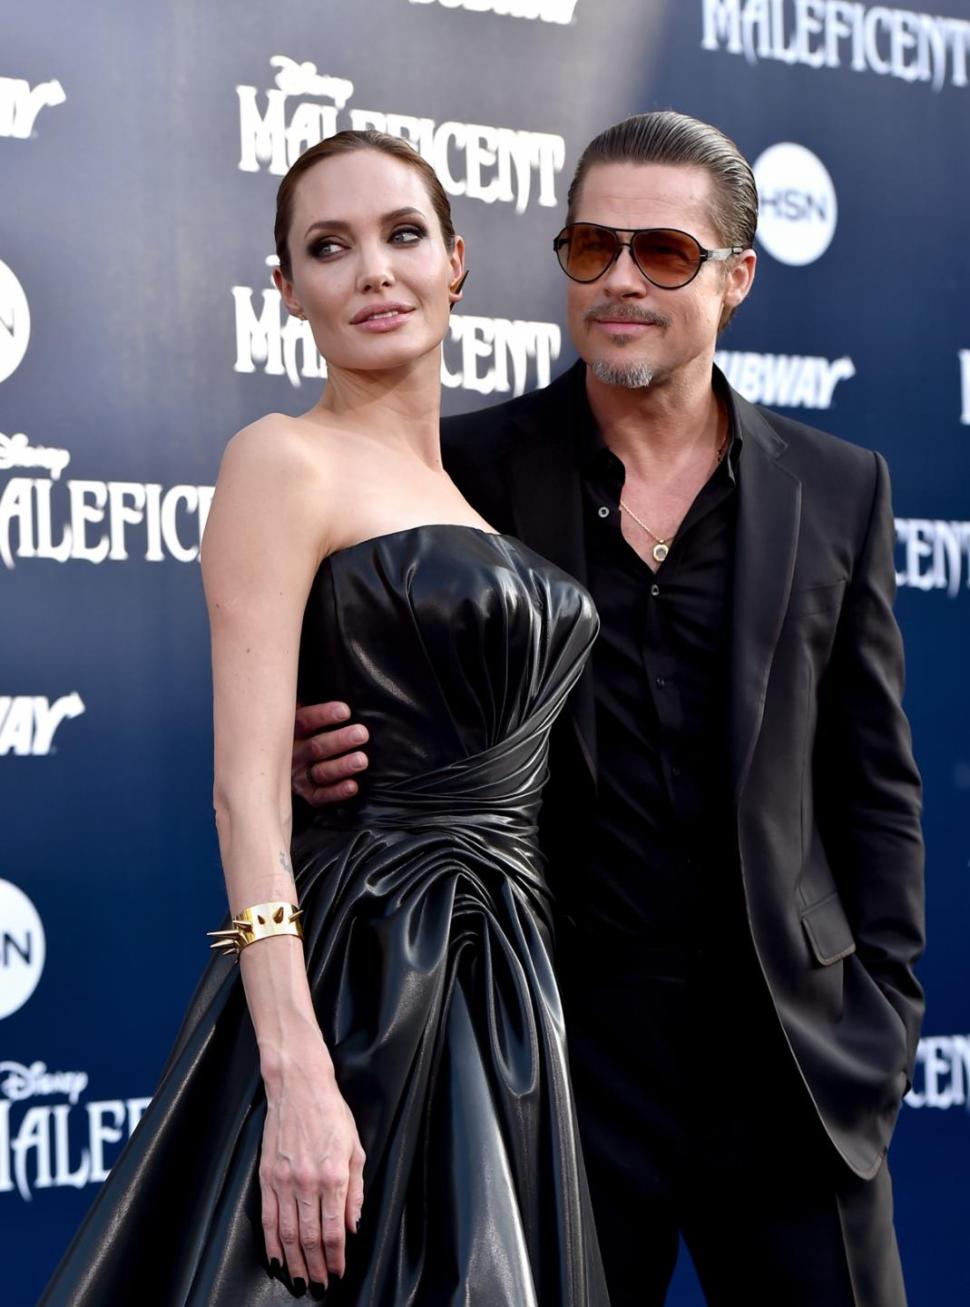 Brad Pitt Attacked At Maleficent Premiere Business2community